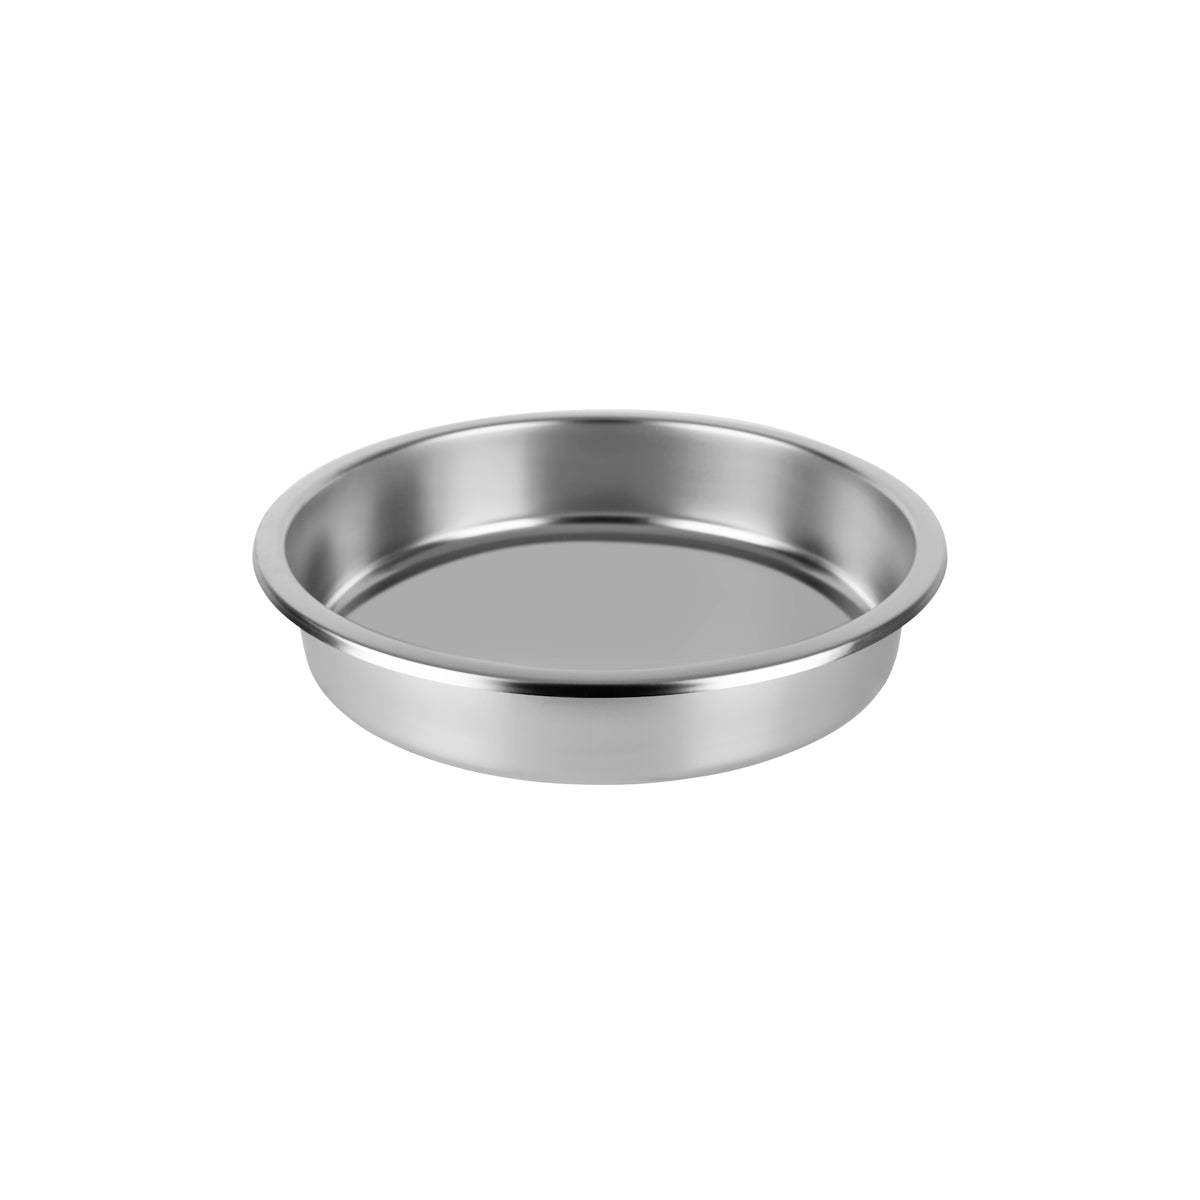 54925-I Chef Inox Round Insert Pan Stainless Steel to Suit 54925 Tomkin Australia Hospitality Supplies